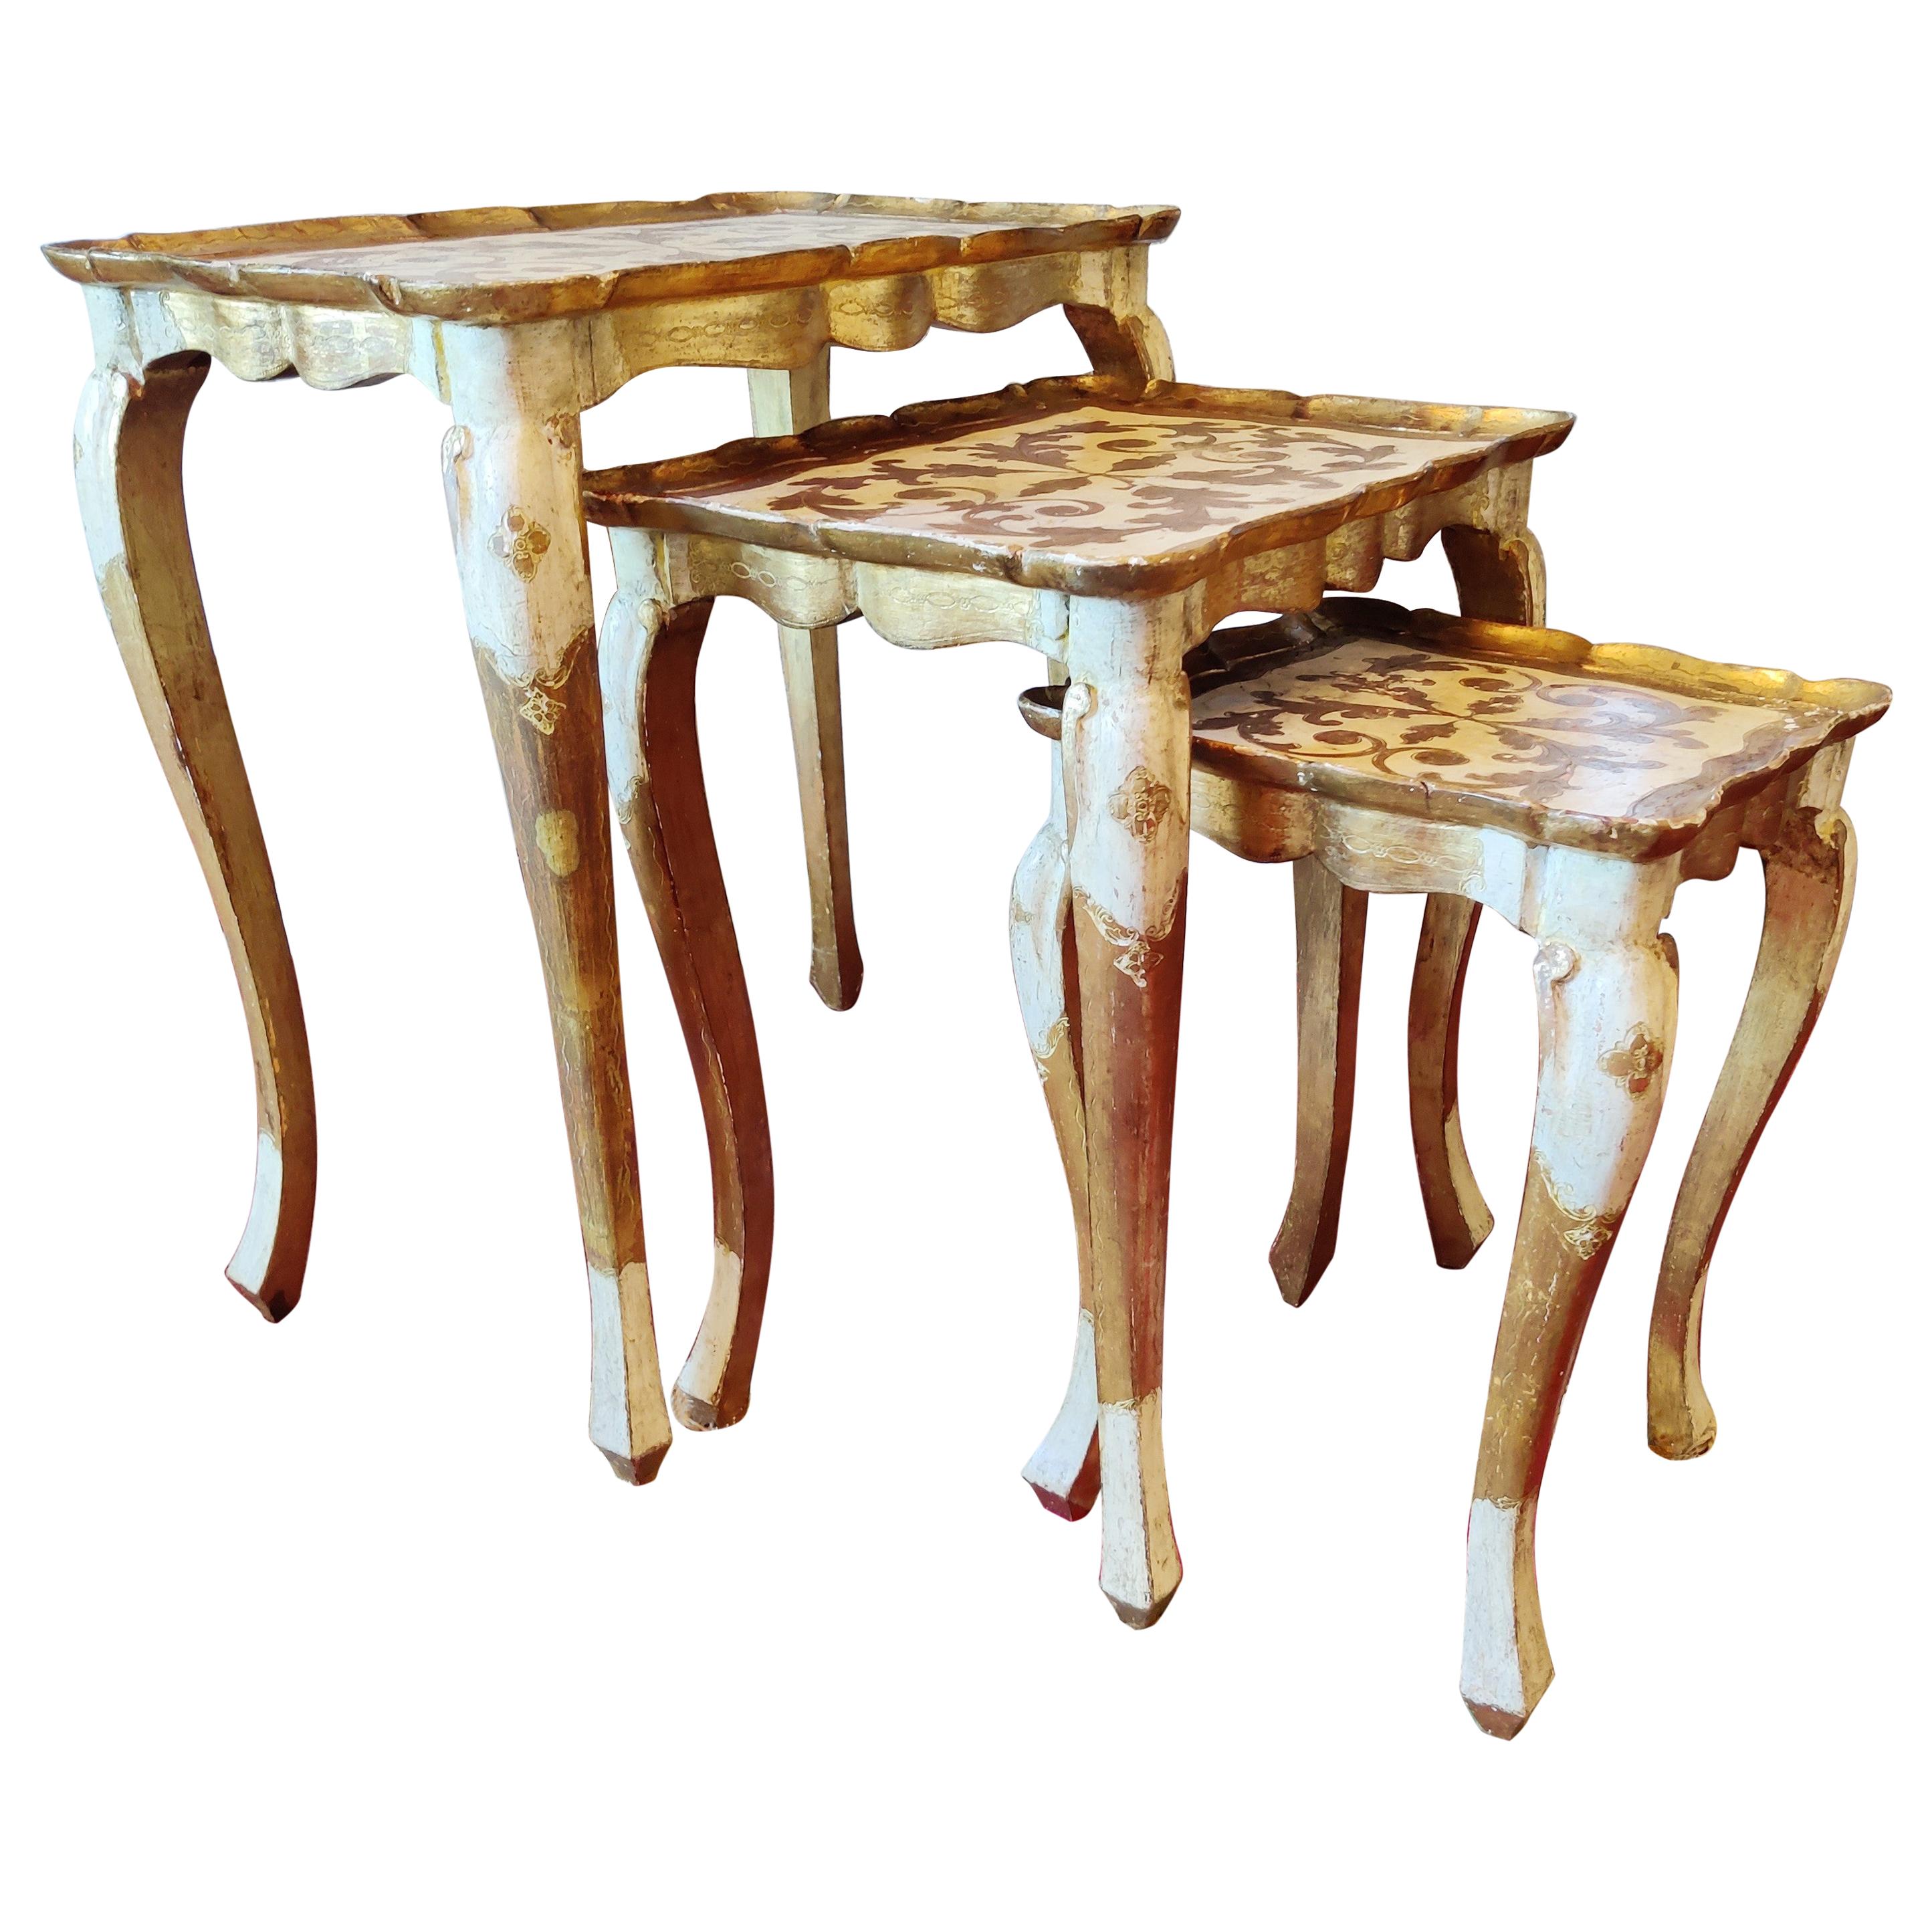 Florentine Nesting Tables by Fratelli Paoletti, 1920s